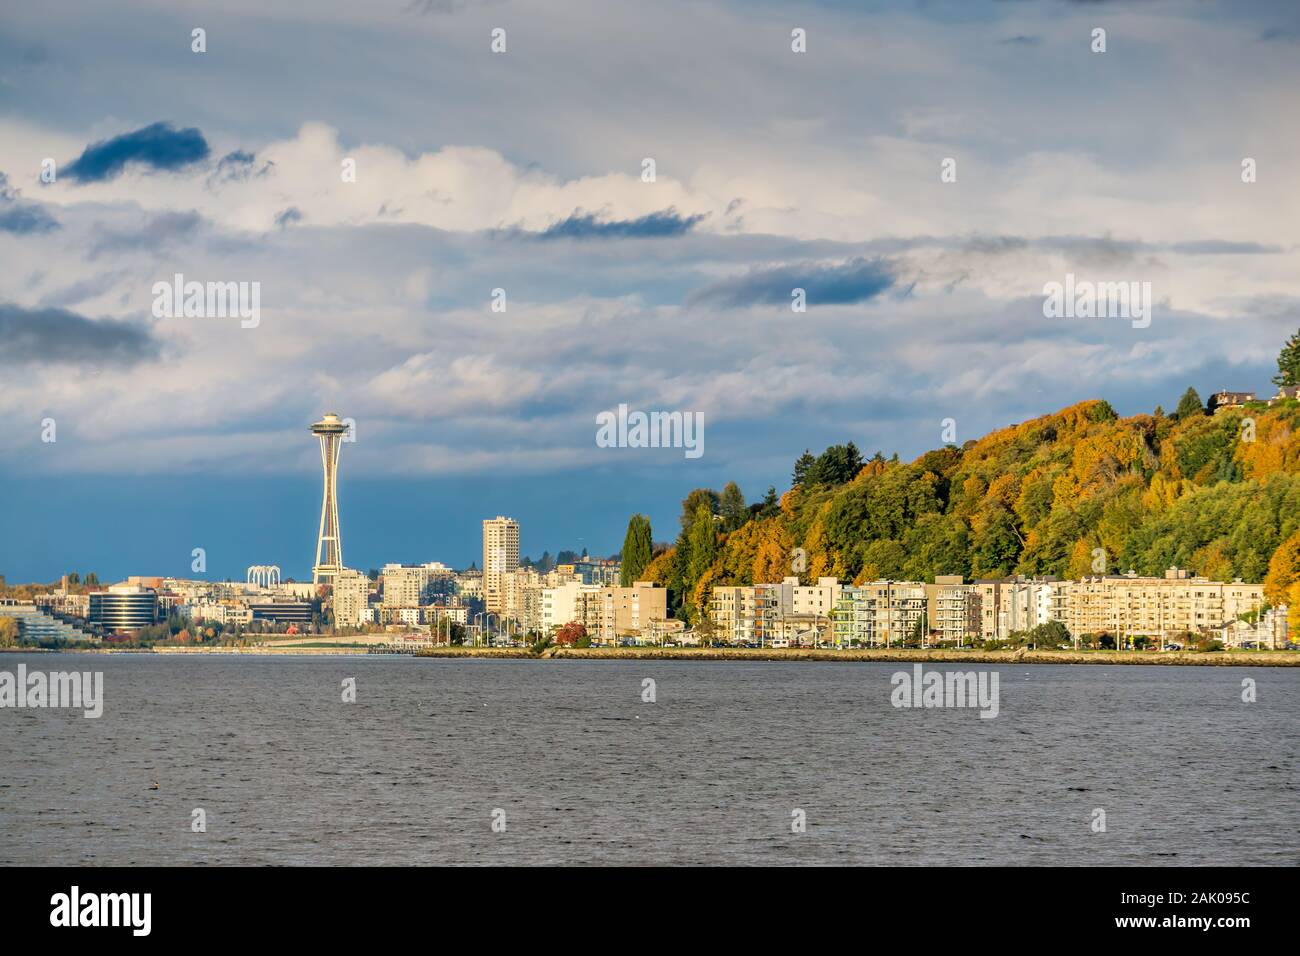 A view of condos at Alki Beach and the Seattle skyline. Stock Photo